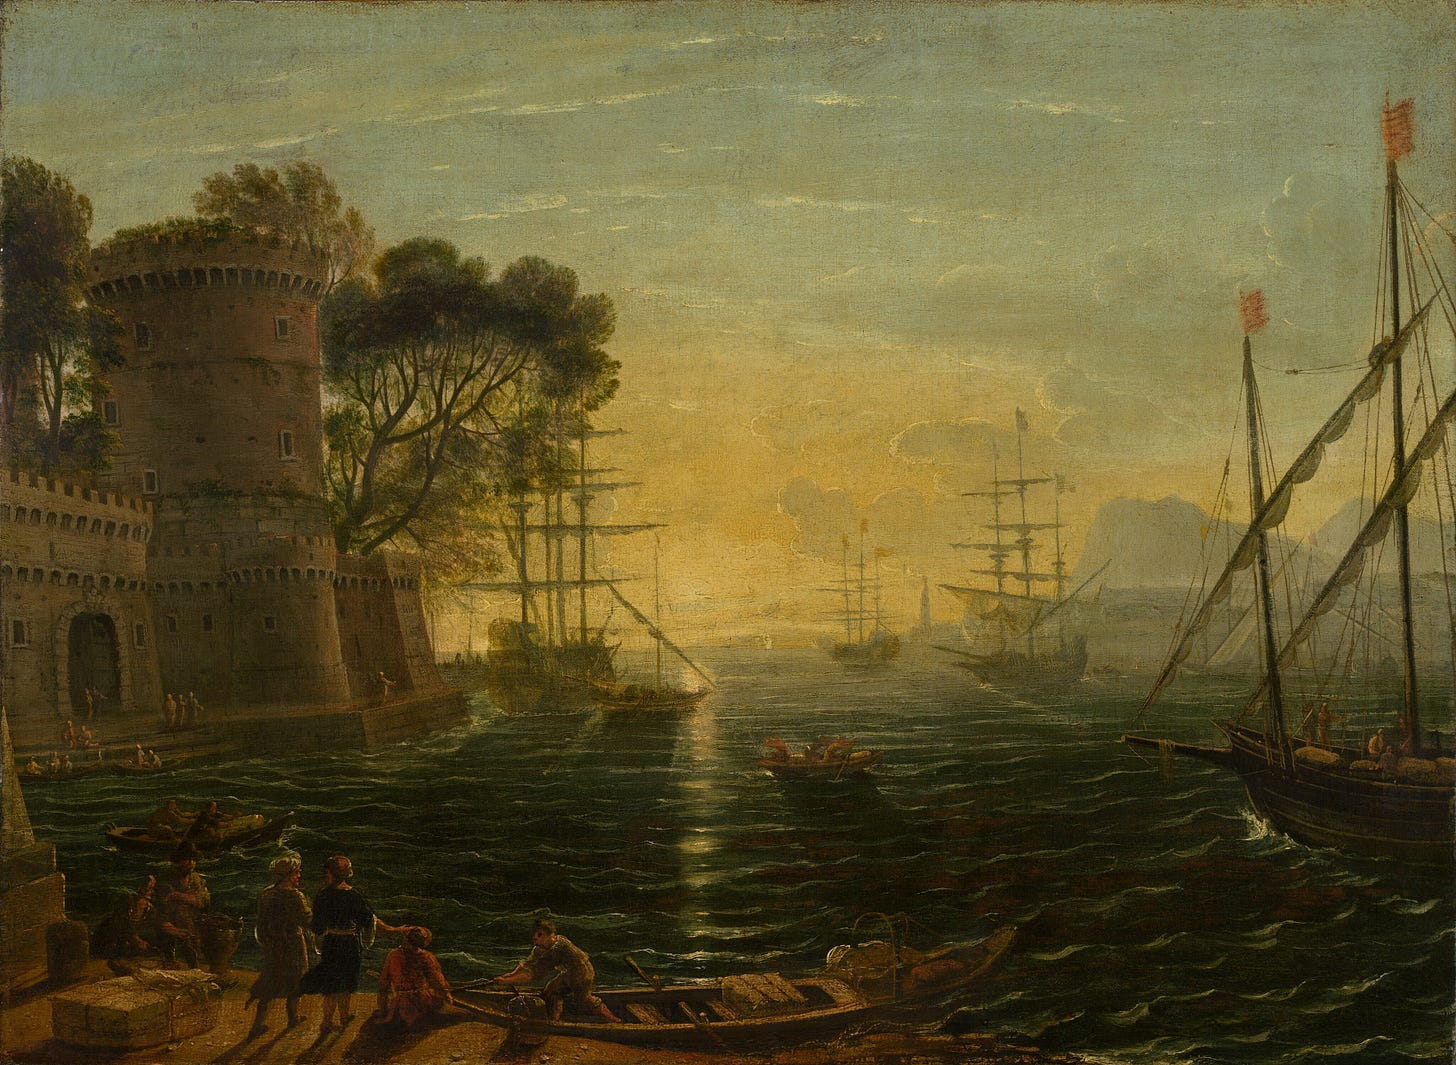 Harbor at Sunset, late 17th century by Follower of Claude Lorrain